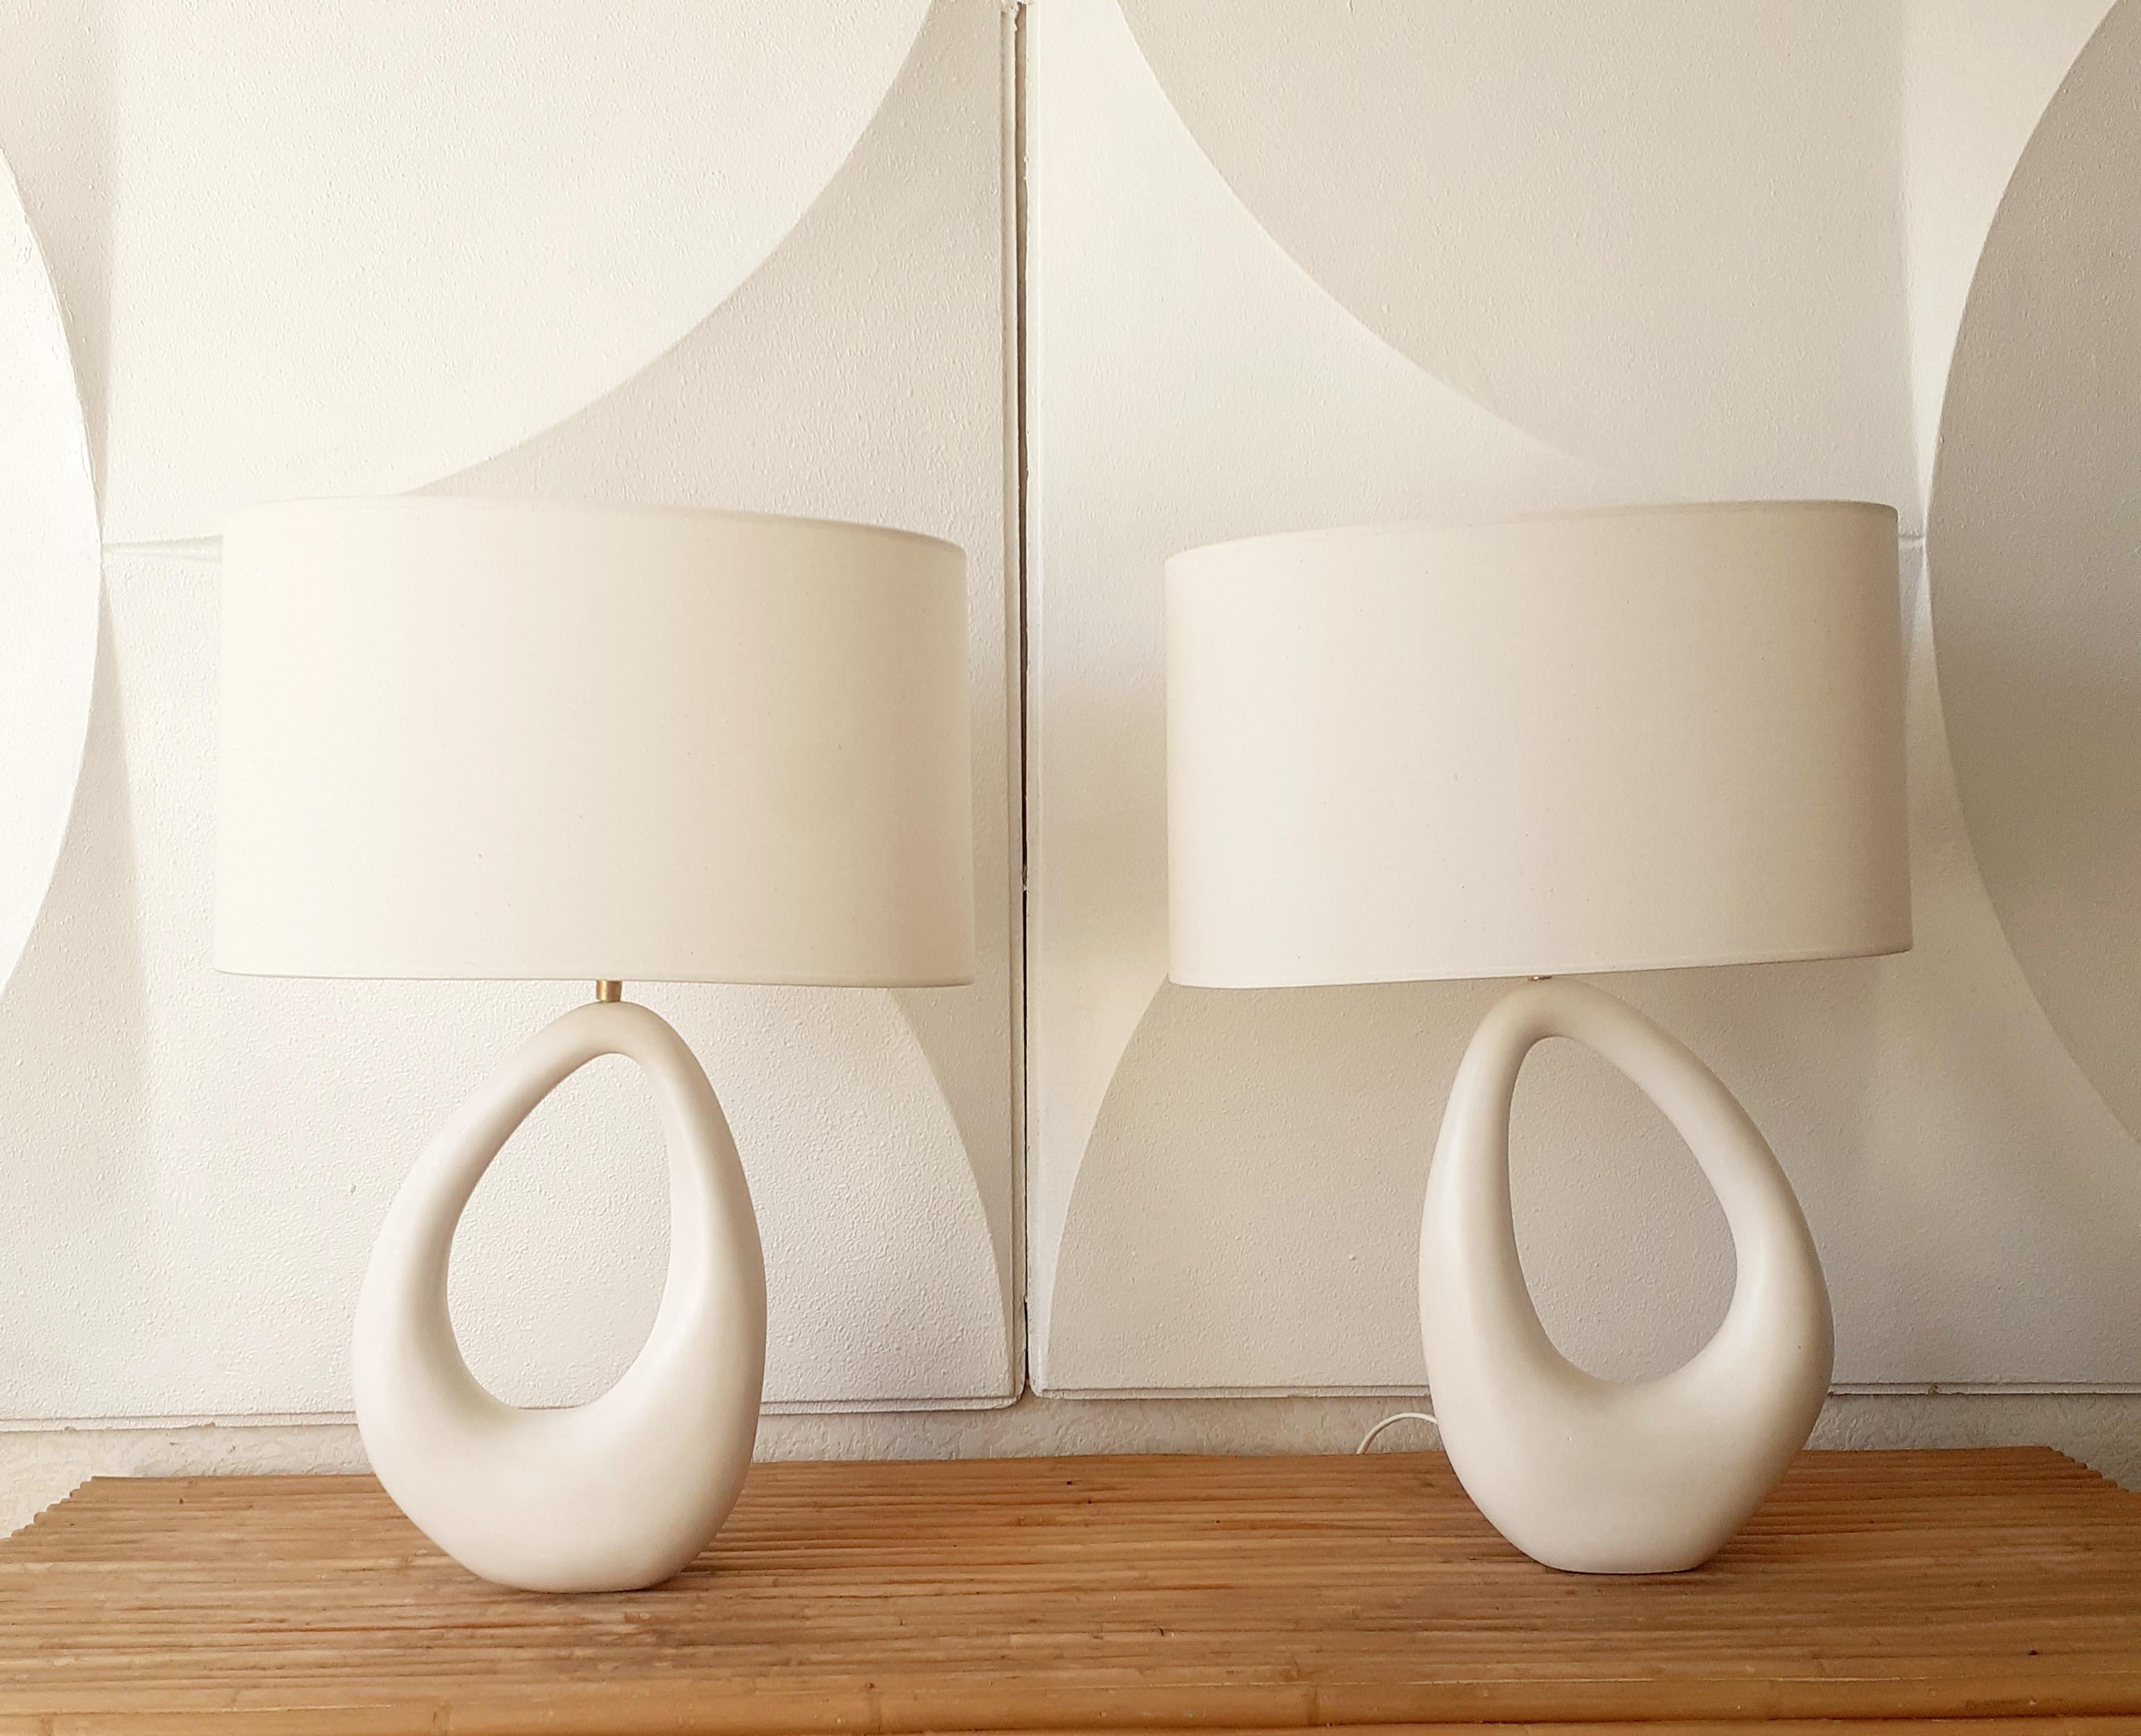 - Elegant ceramic lamp with shade, handmade in Parisian workshop by Elsa Foulon Studio.
Mineral, organic and sensual shape.
Cotton shade, brass structure, soft white enameled ceramic, screw bulb. 
UL Listed electricity on request.
Ceramic